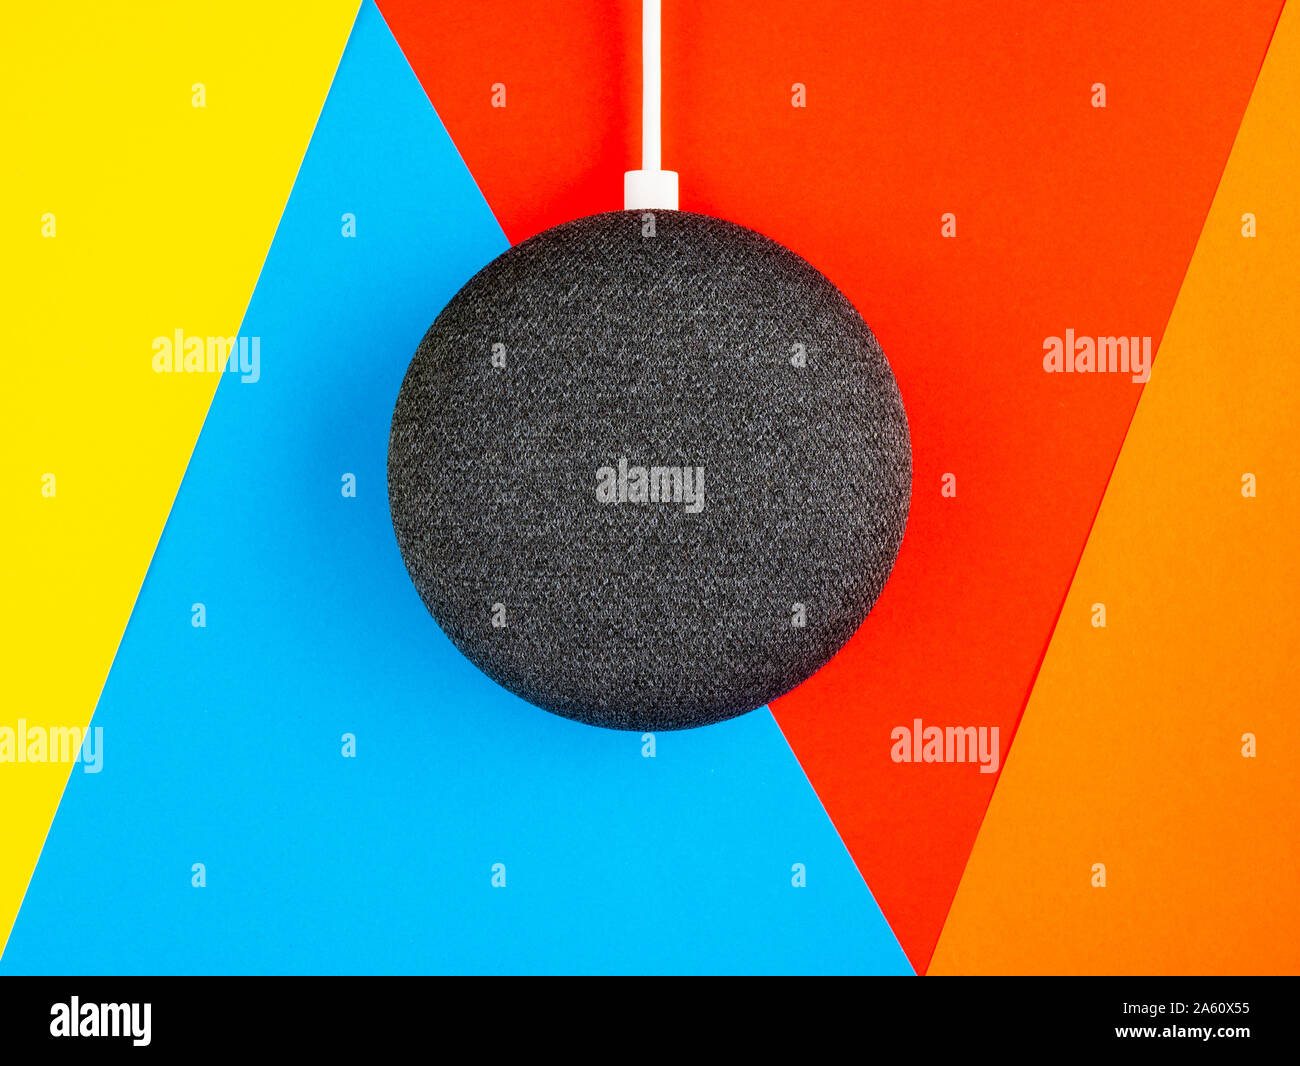 Smart home device speaker on bright coloured background Stock Photo